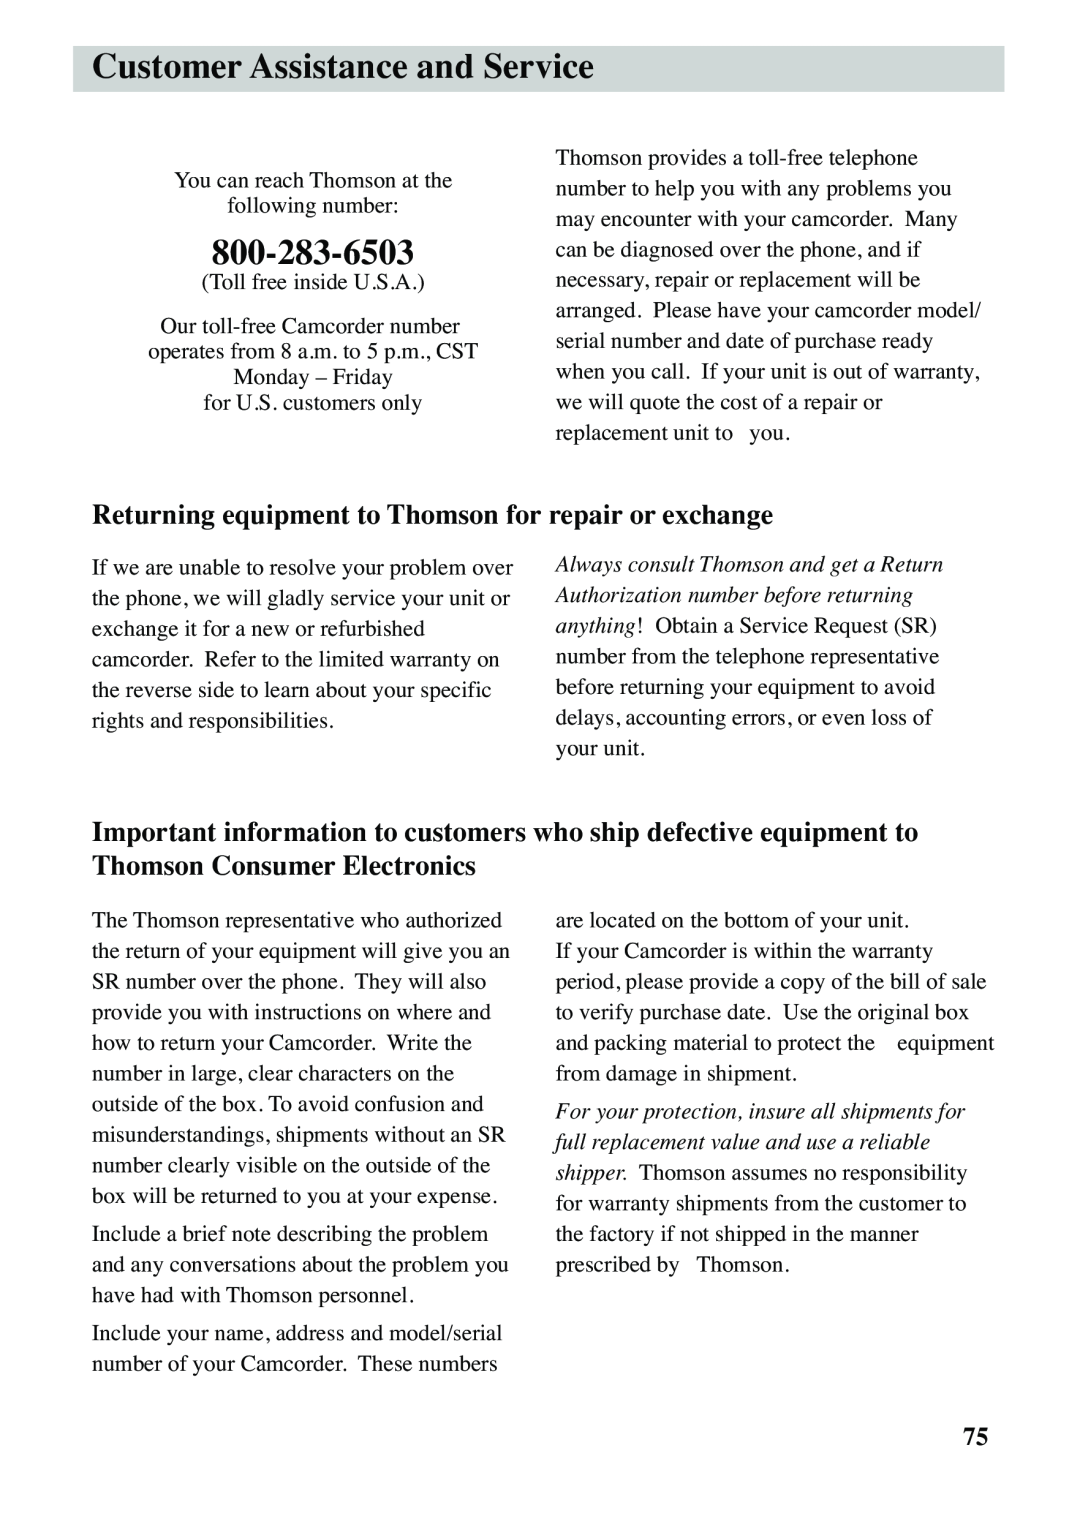 RCA CC6263 manual Customer Assistance and Service, Returning equipment to Thomson for repair or exchange 